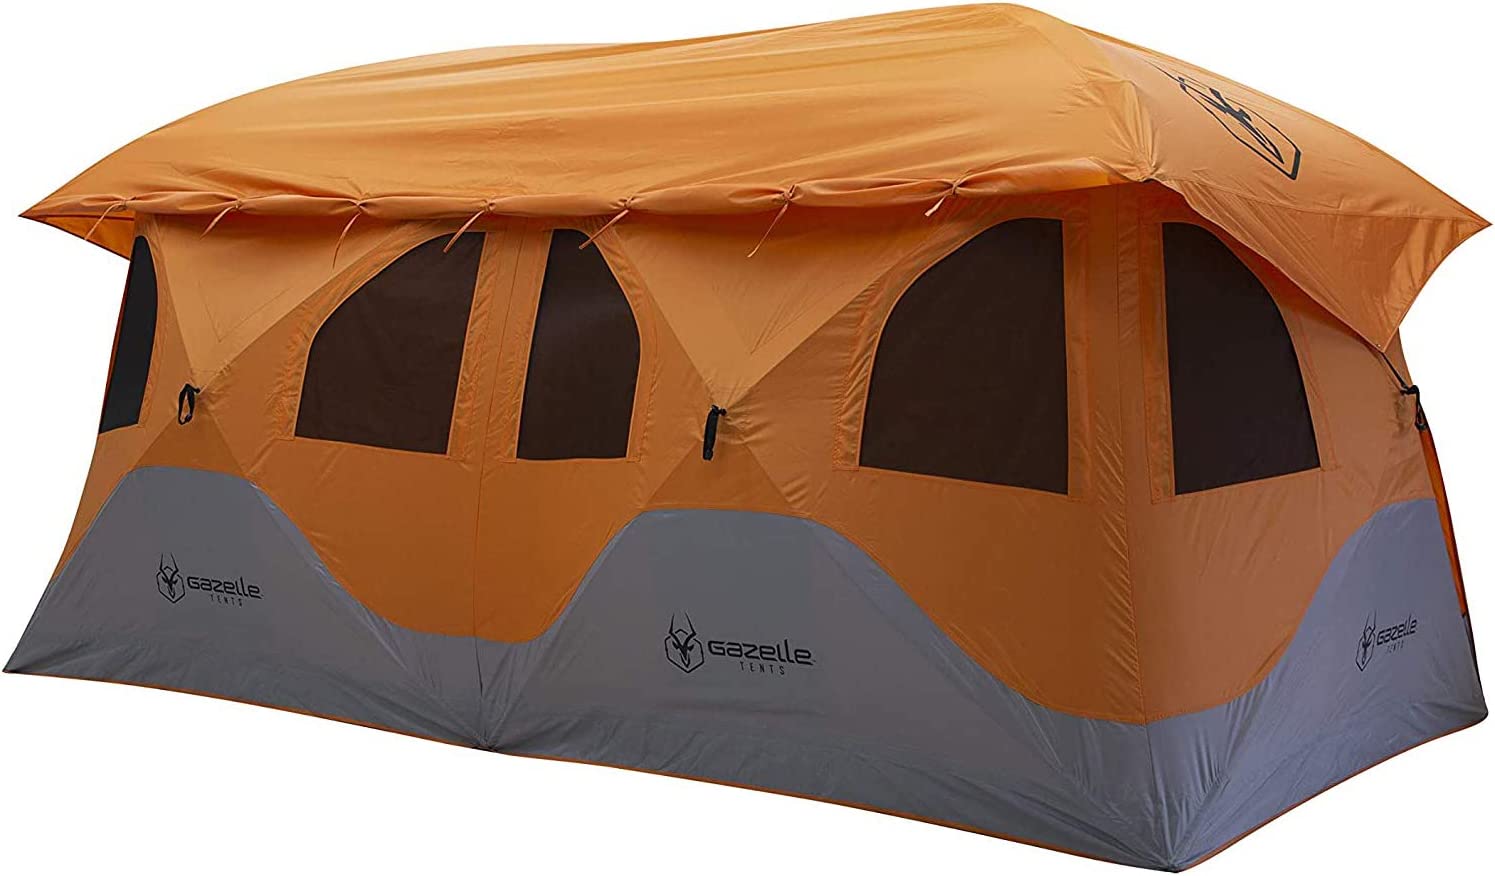 Gazelle Tents™, T8 Hub Tent, Easy 90 Second Set-Up, Waterproof, UV Resistant, Removable Floor, Ample Storage Options, 8-Person, Sunset Orange, 78" x 94" x 165", GT800SS